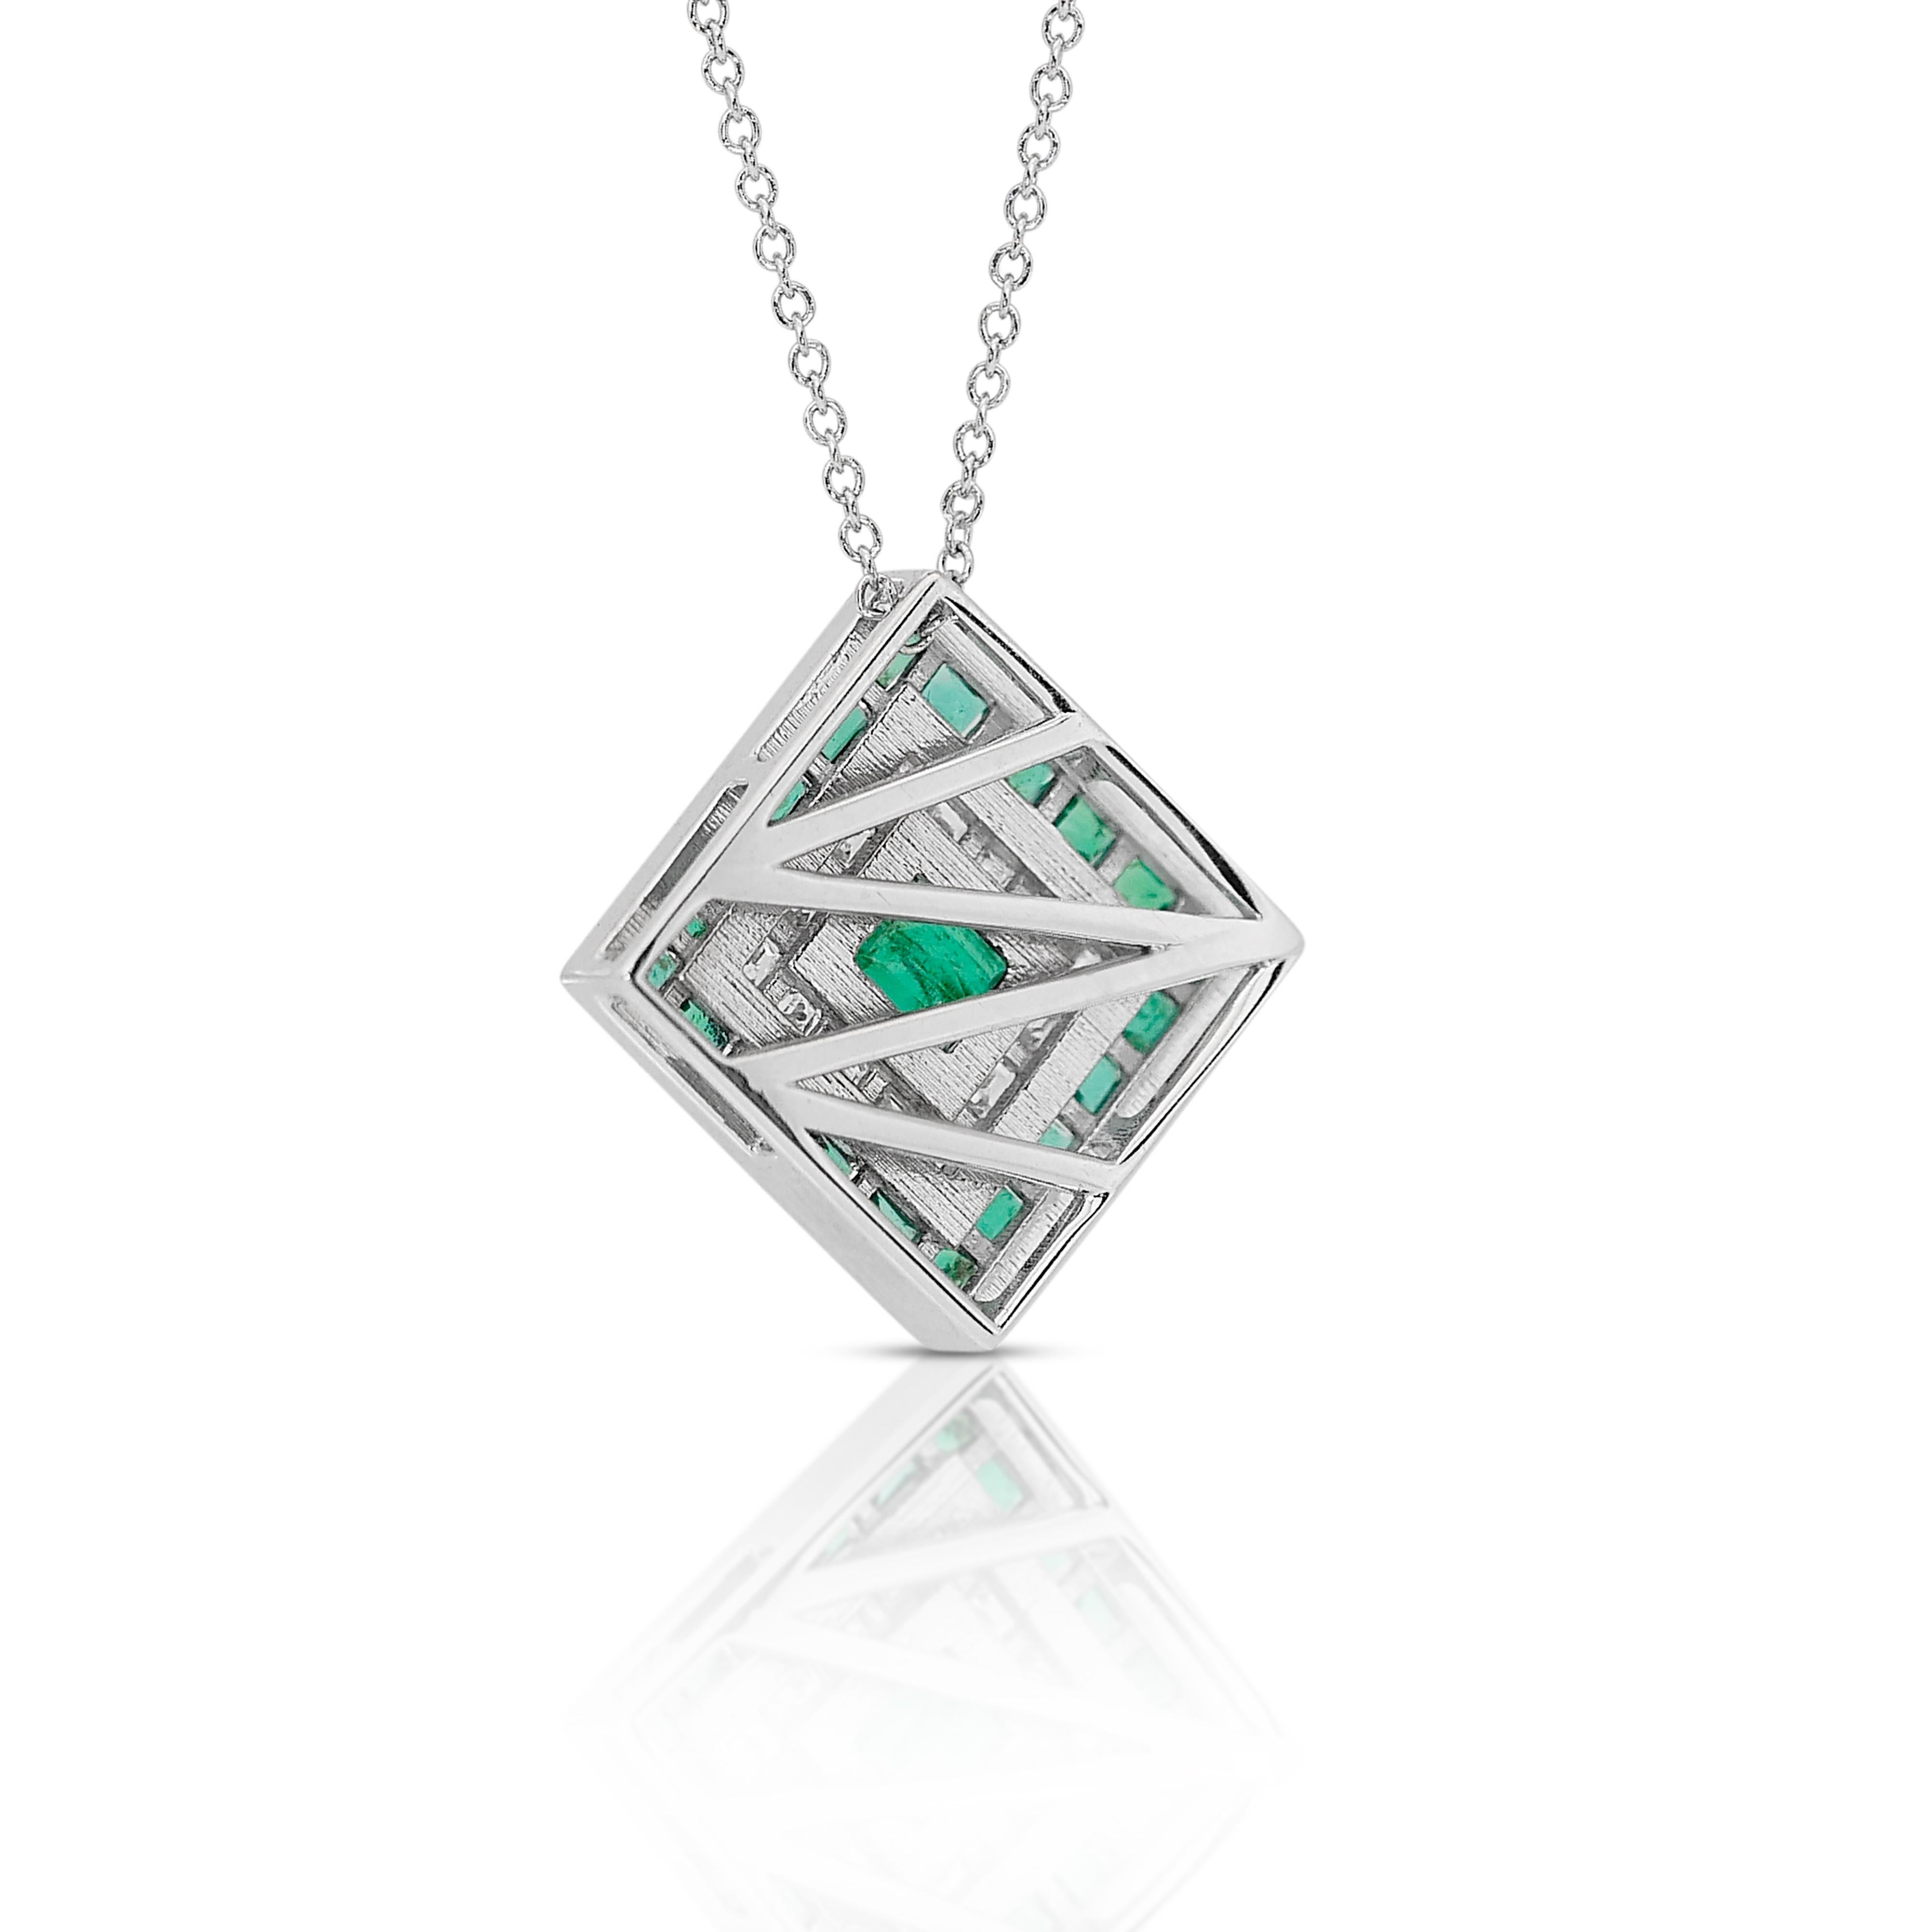 Captivating 1.45ct Emeralds and Diamonds Halo Necklace in 14k White Gold - IGI  For Sale 3